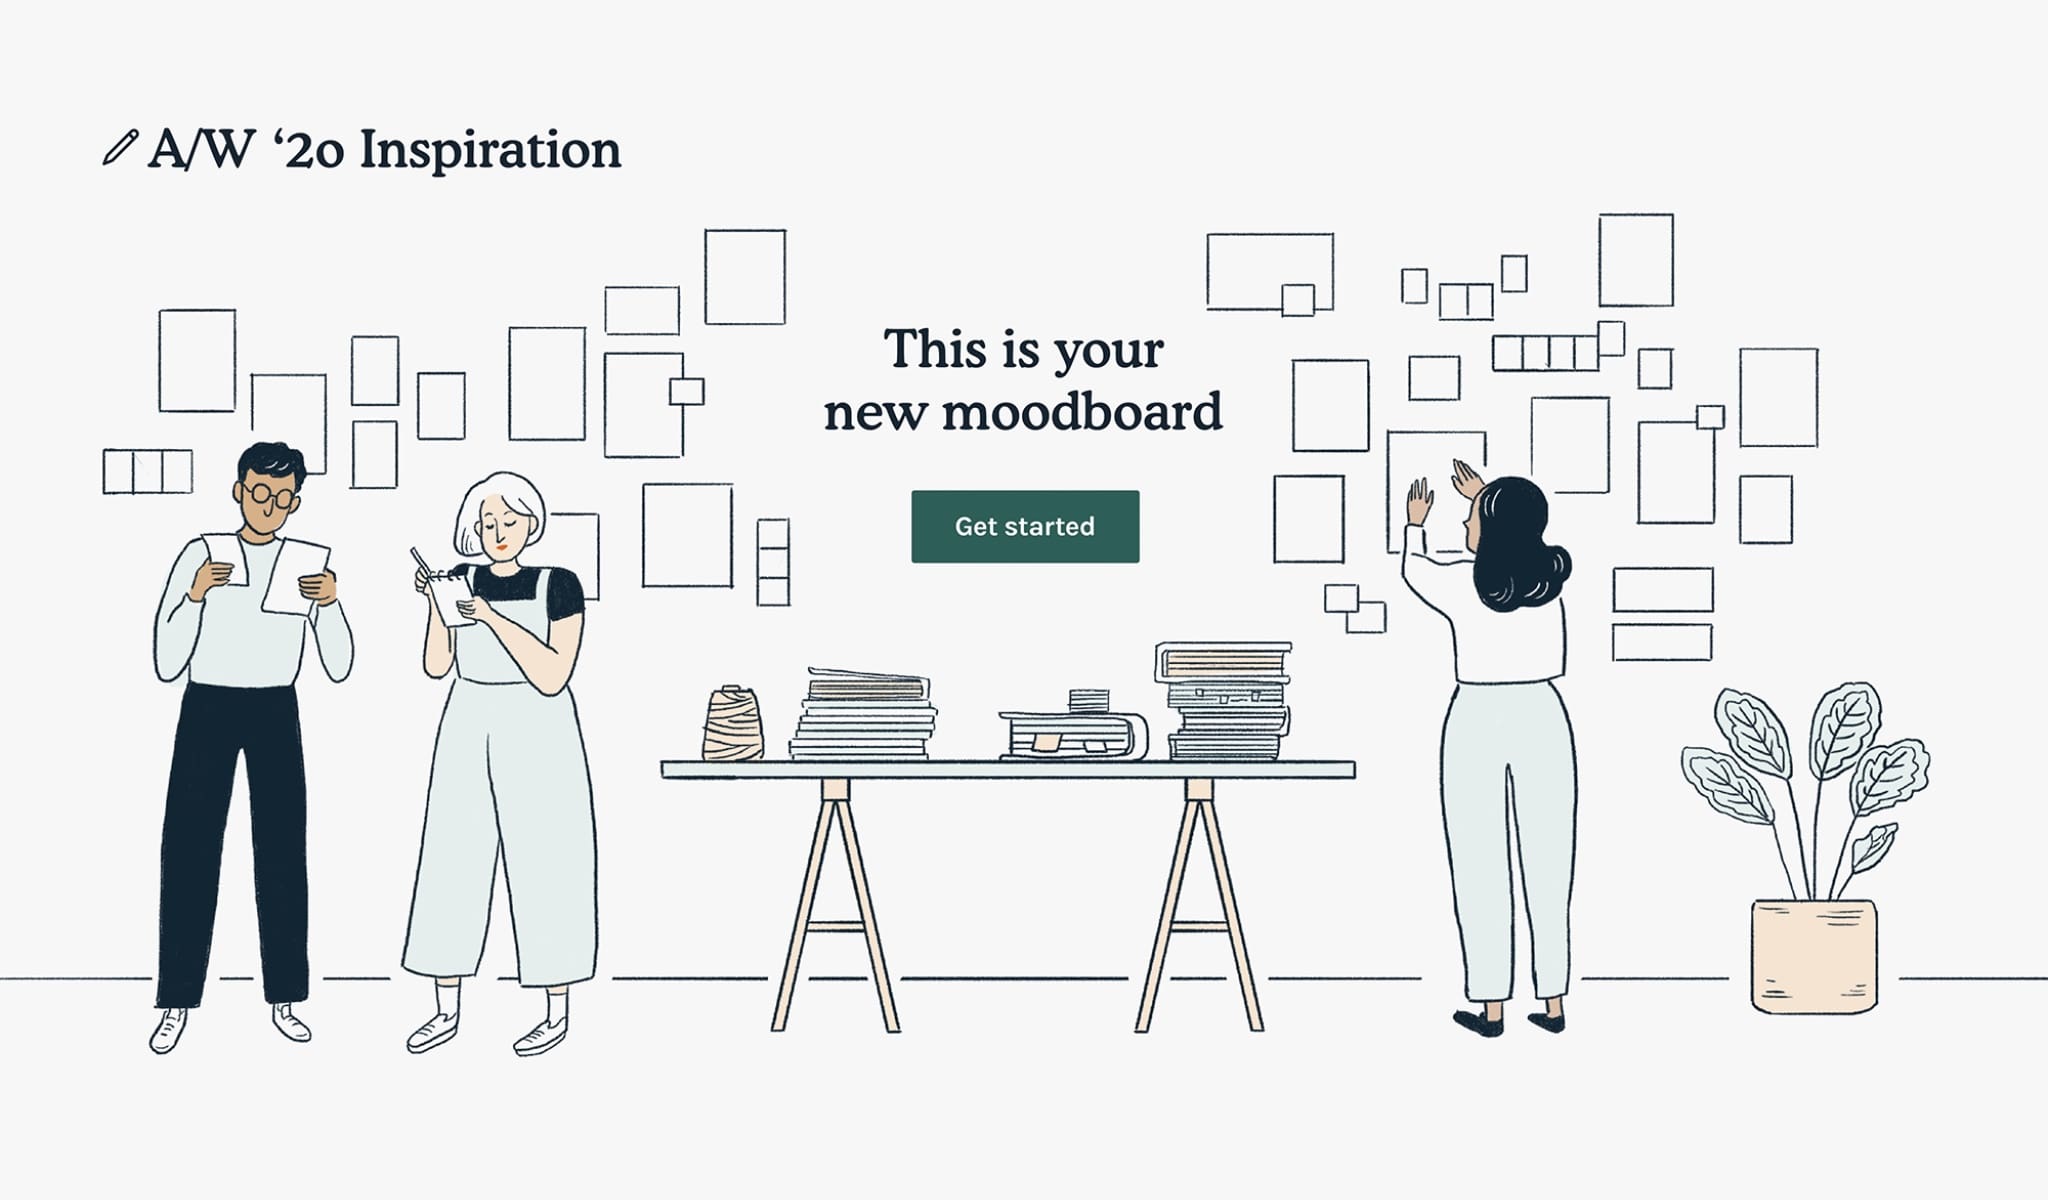 MOODBOARD TOOL THAT’S FREE FOR FASHION BRANDS DURING COVID-19